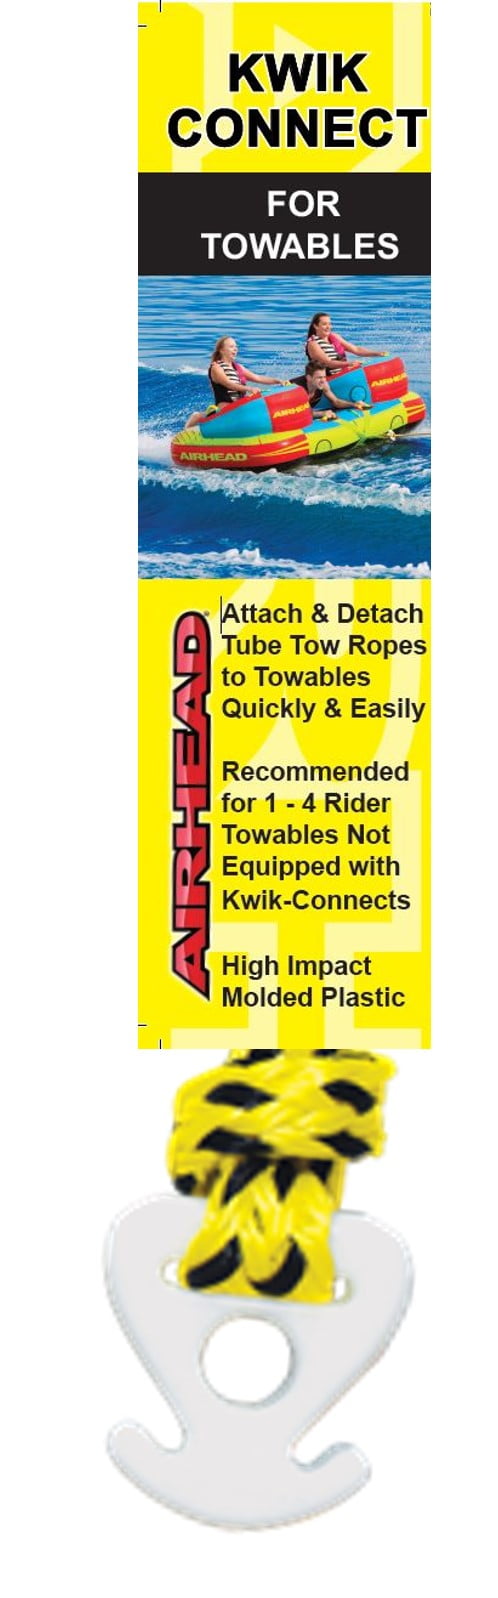 NEW Airhead High Impact Kwik Connect for Towables Tube Tow Ropes 